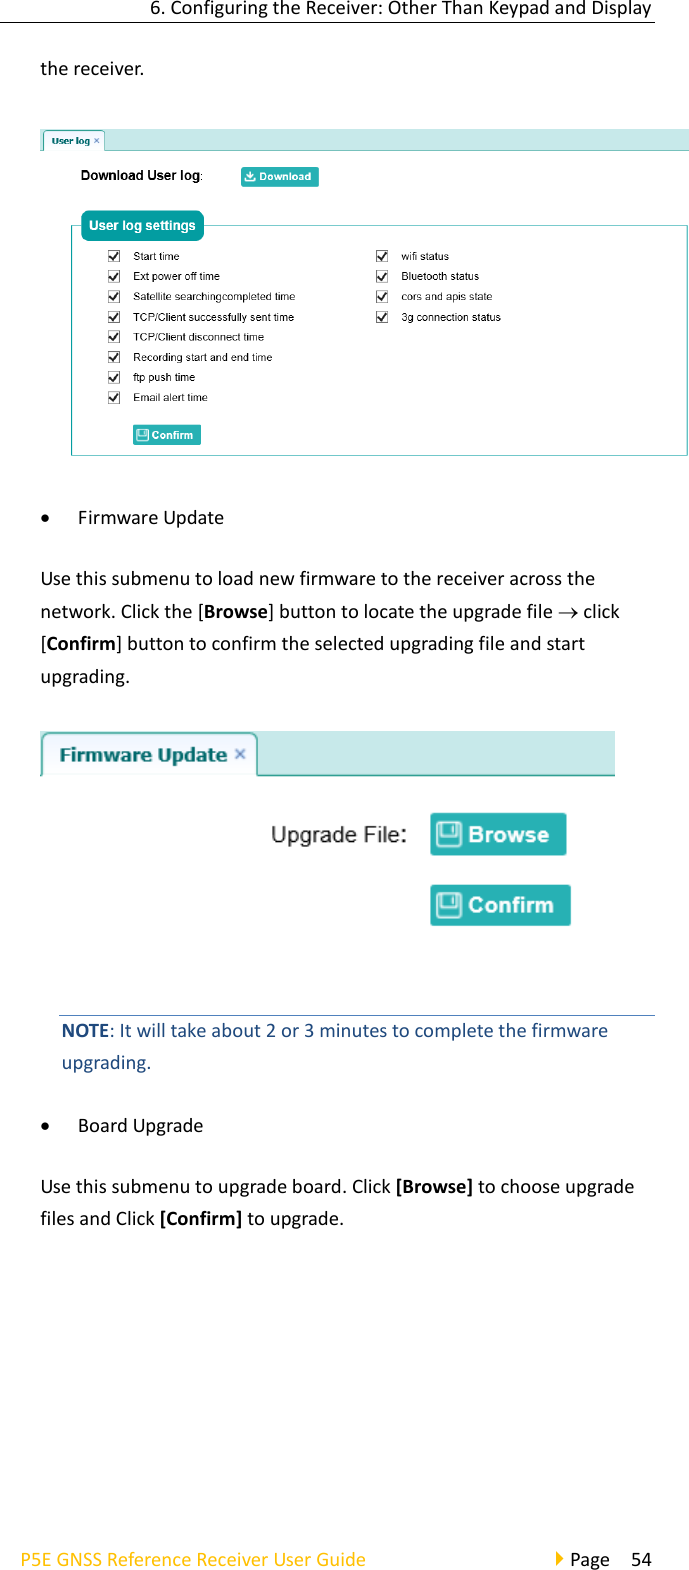 6. Configuring the Receiver: Other Than Keypad and Display P5E GNSS Reference Receiver User Guide                                     Page  54 the receiver.  • Firmware Update Use this submenu to load new firmware to the receiver across the network. Click the [Browse] button to locate the upgrade file  click [Confirm] button to confirm the selected upgrading file and start upgrading.    NOTE: It will take about 2 or 3 minutes to complete the firmware upgrading.   • Board Upgrade Use this submenu to upgrade board. Click [Browse] to choose upgrade files and Click [Confirm] to upgrade. 